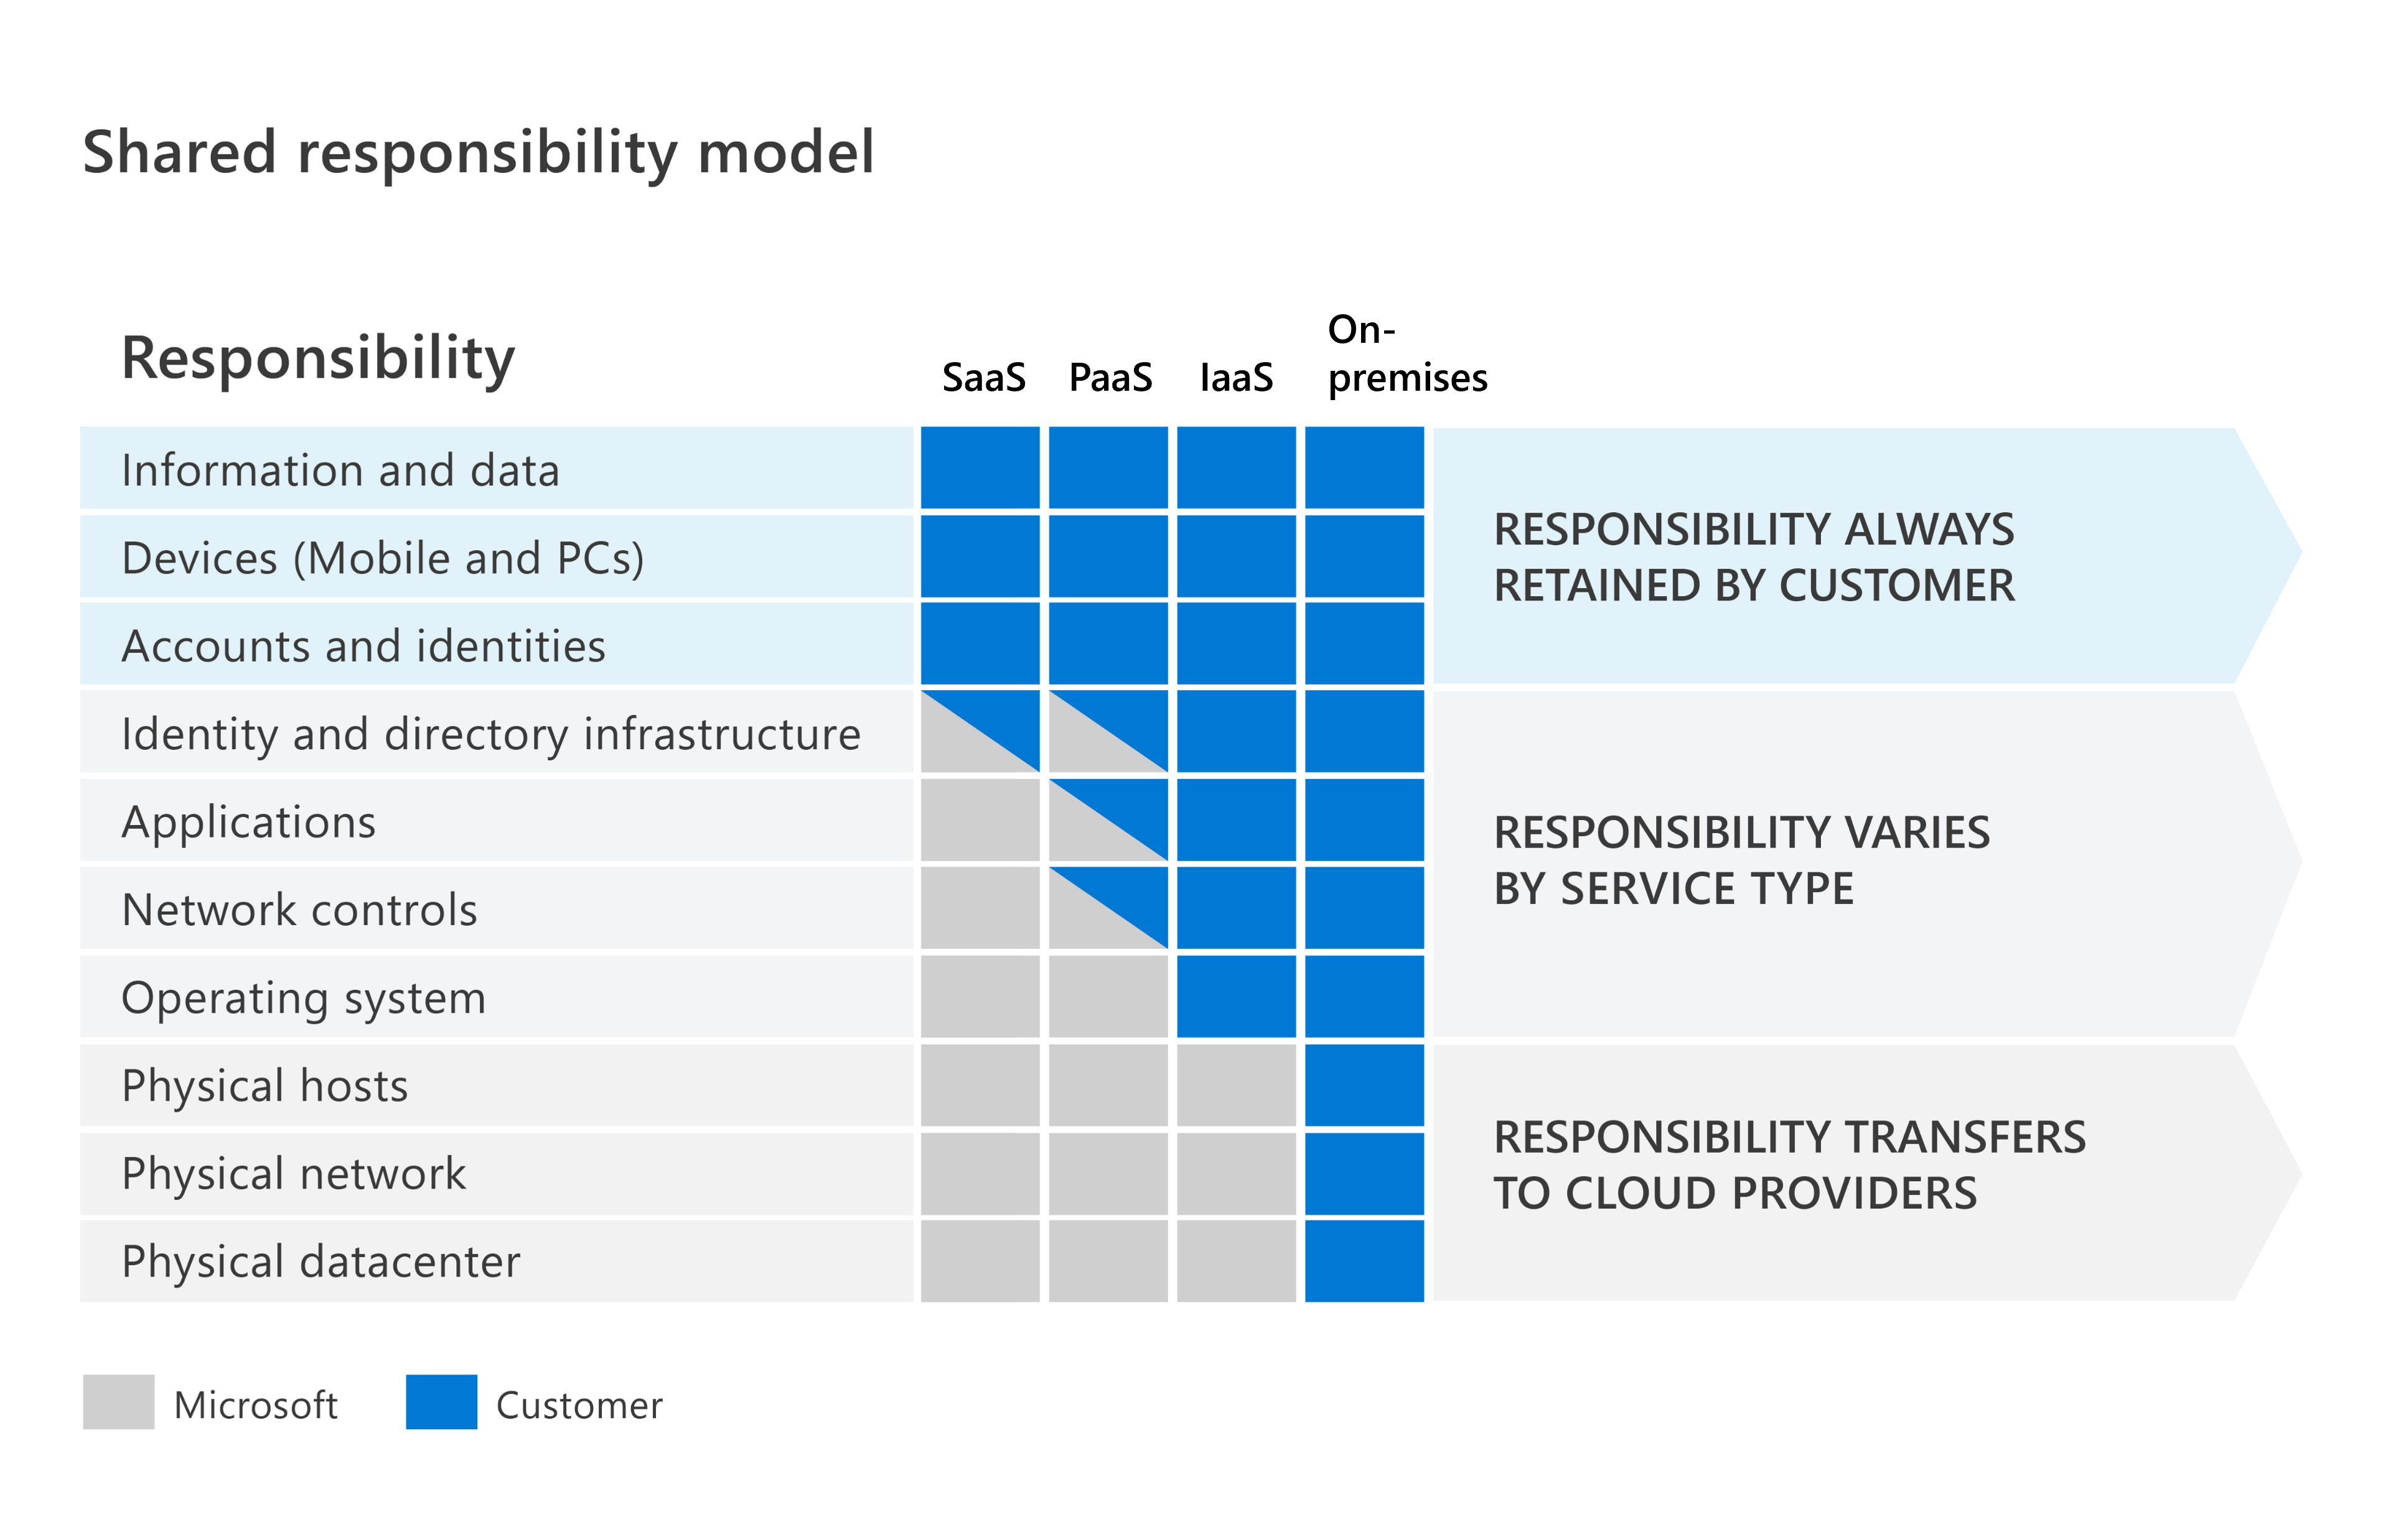 The Shared responsibility model responsibilities by type.